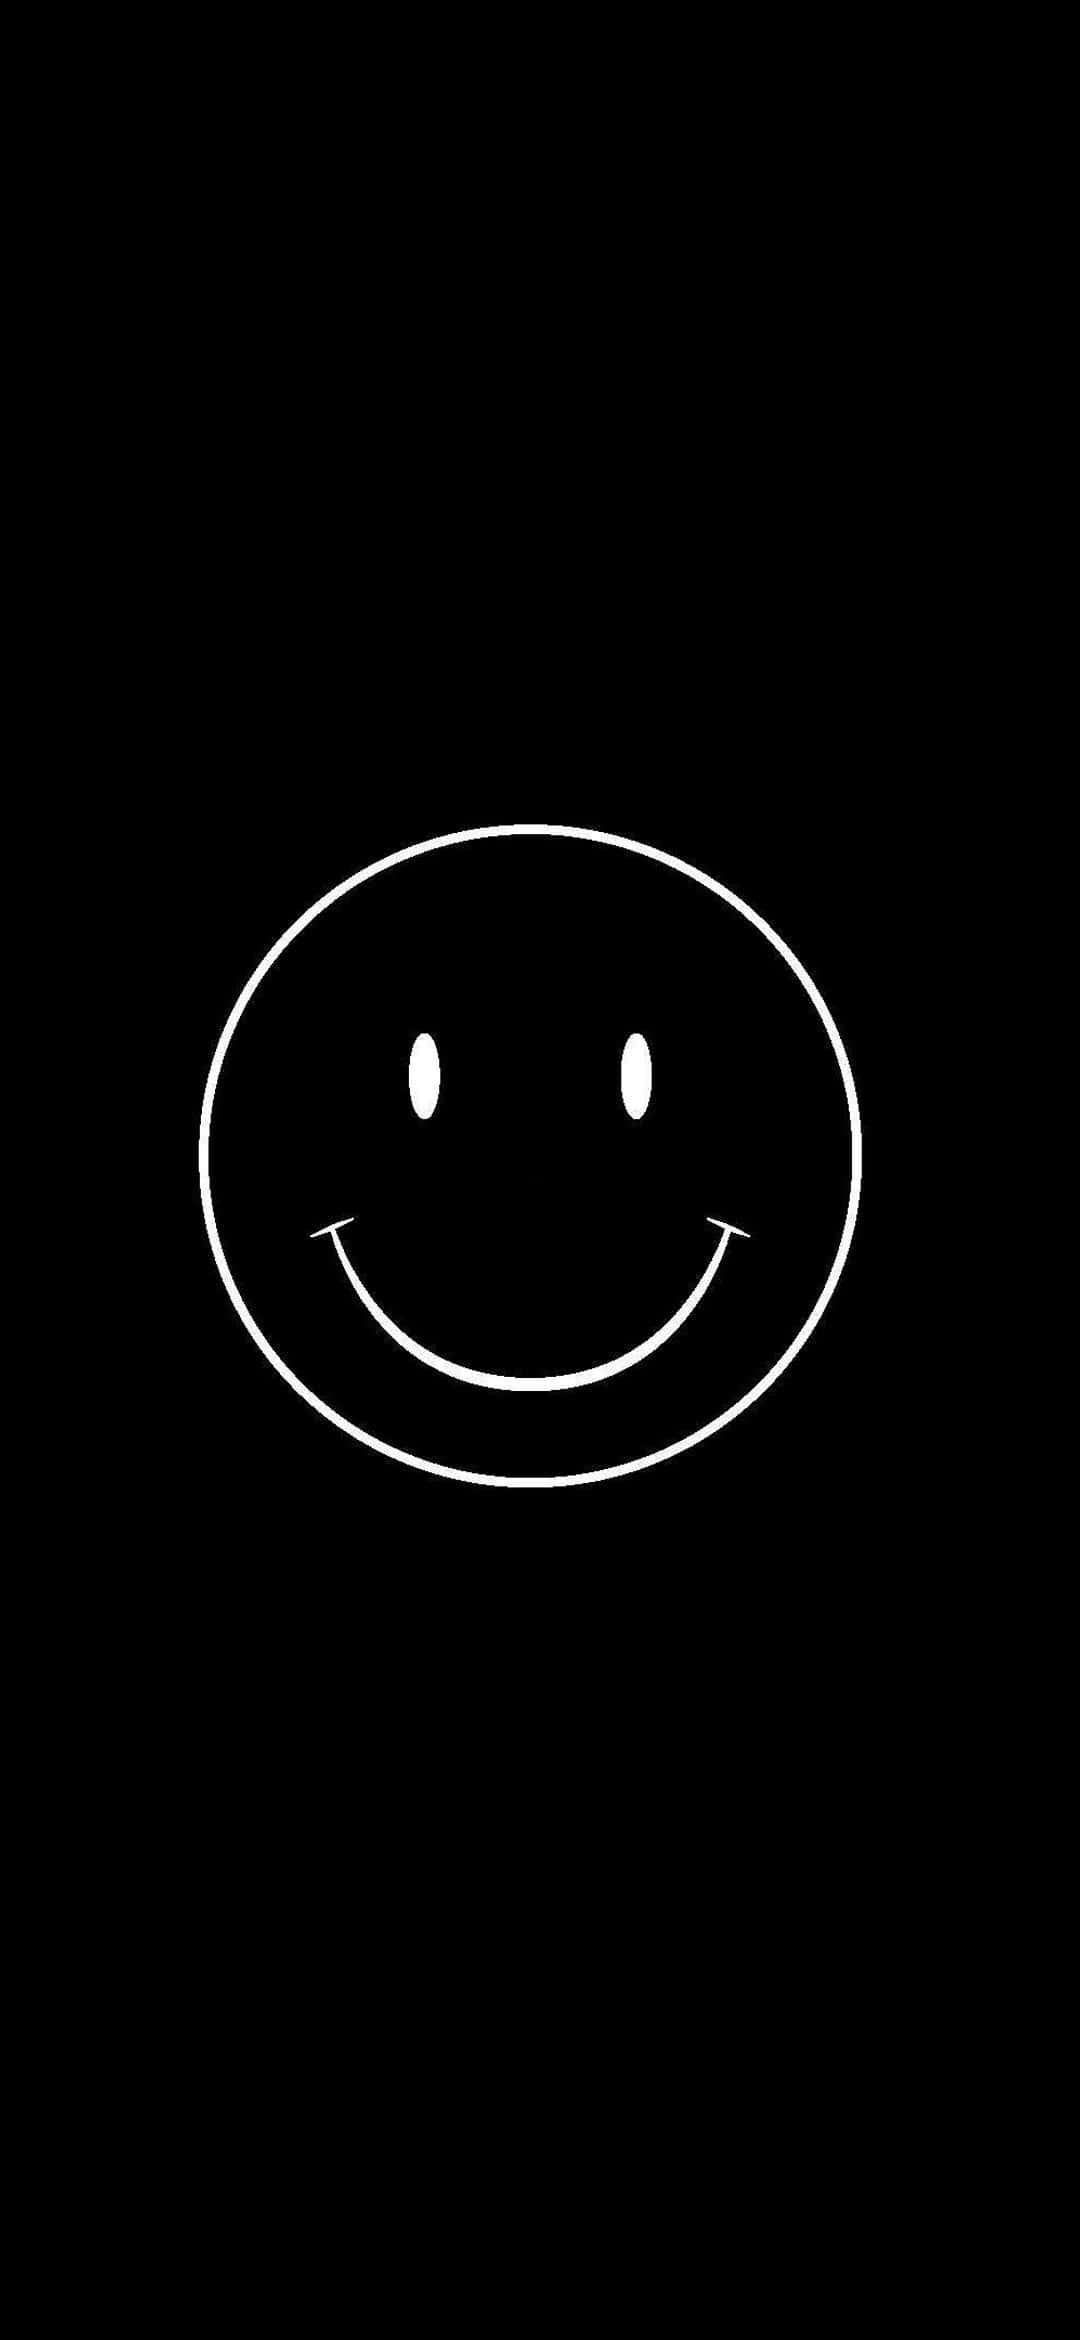 A White Smiley Face On A Black Background